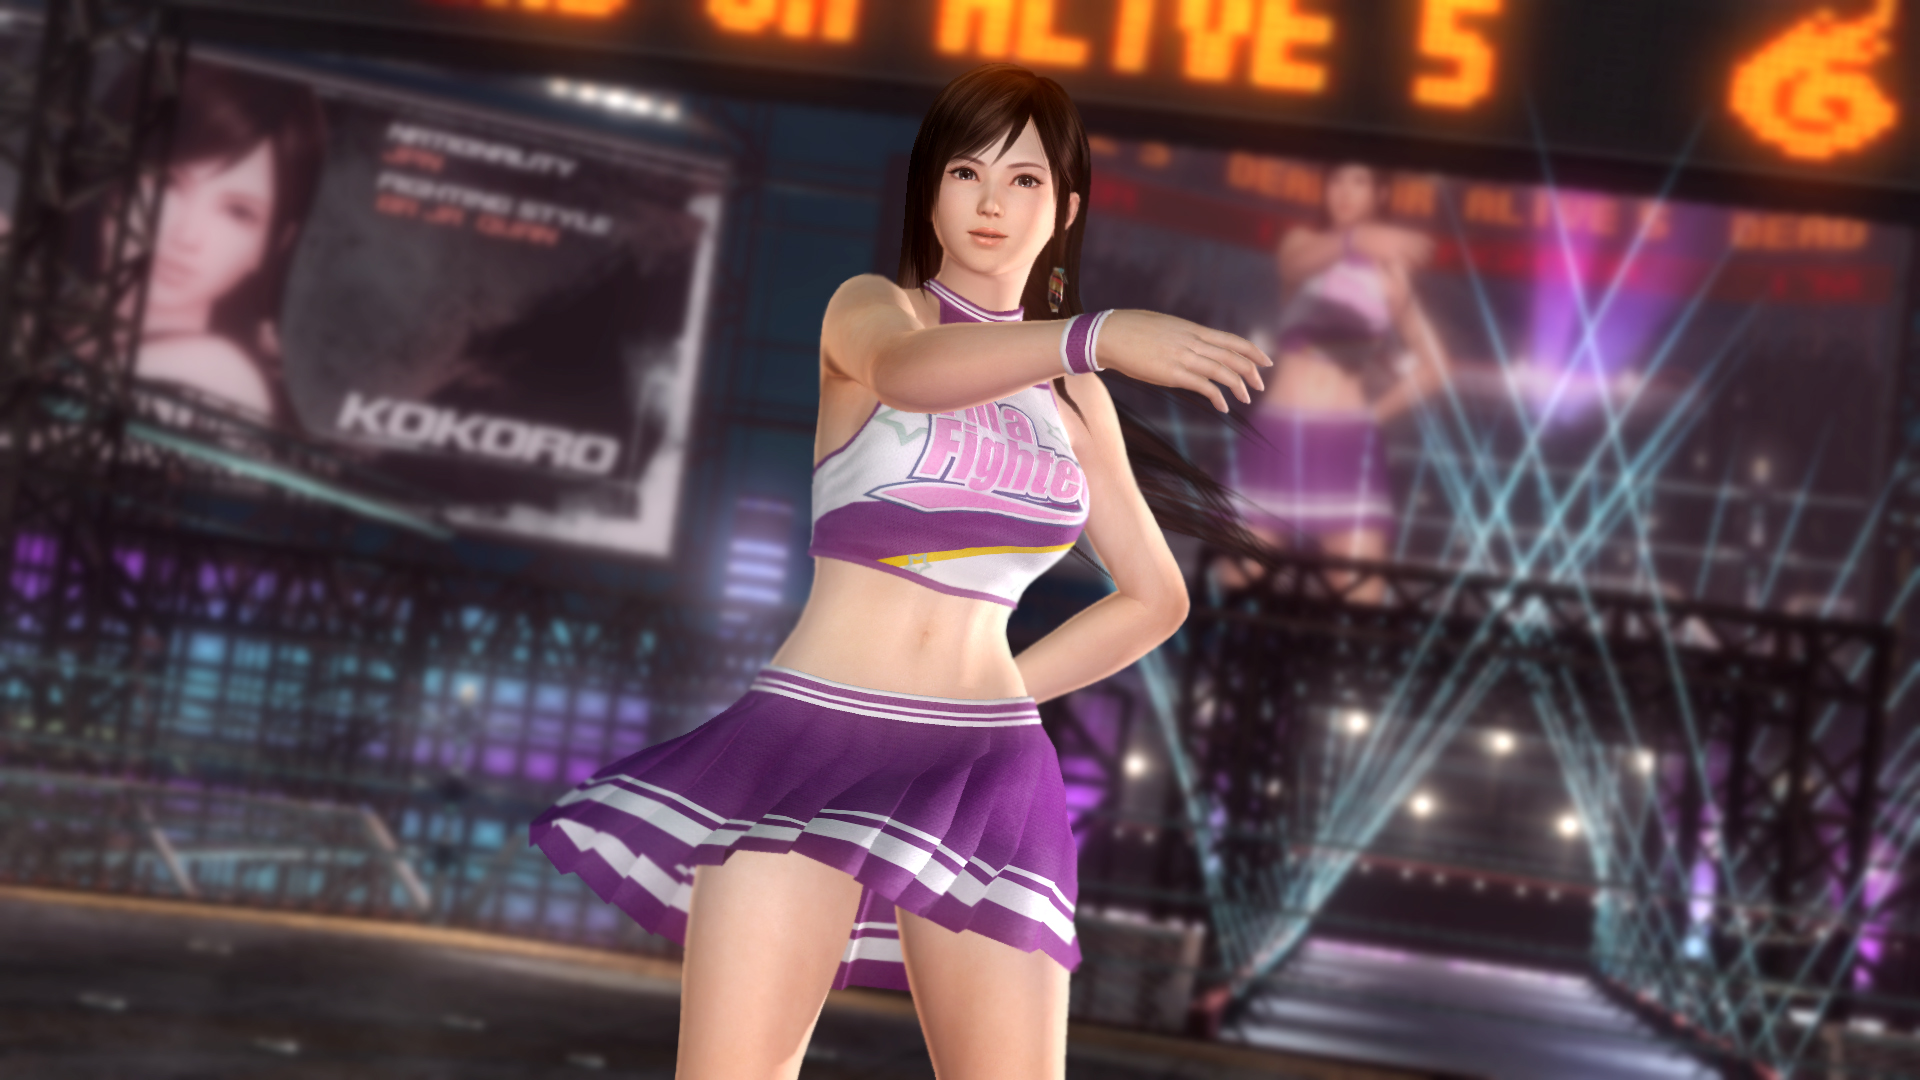 dead or alive 5 plus download free